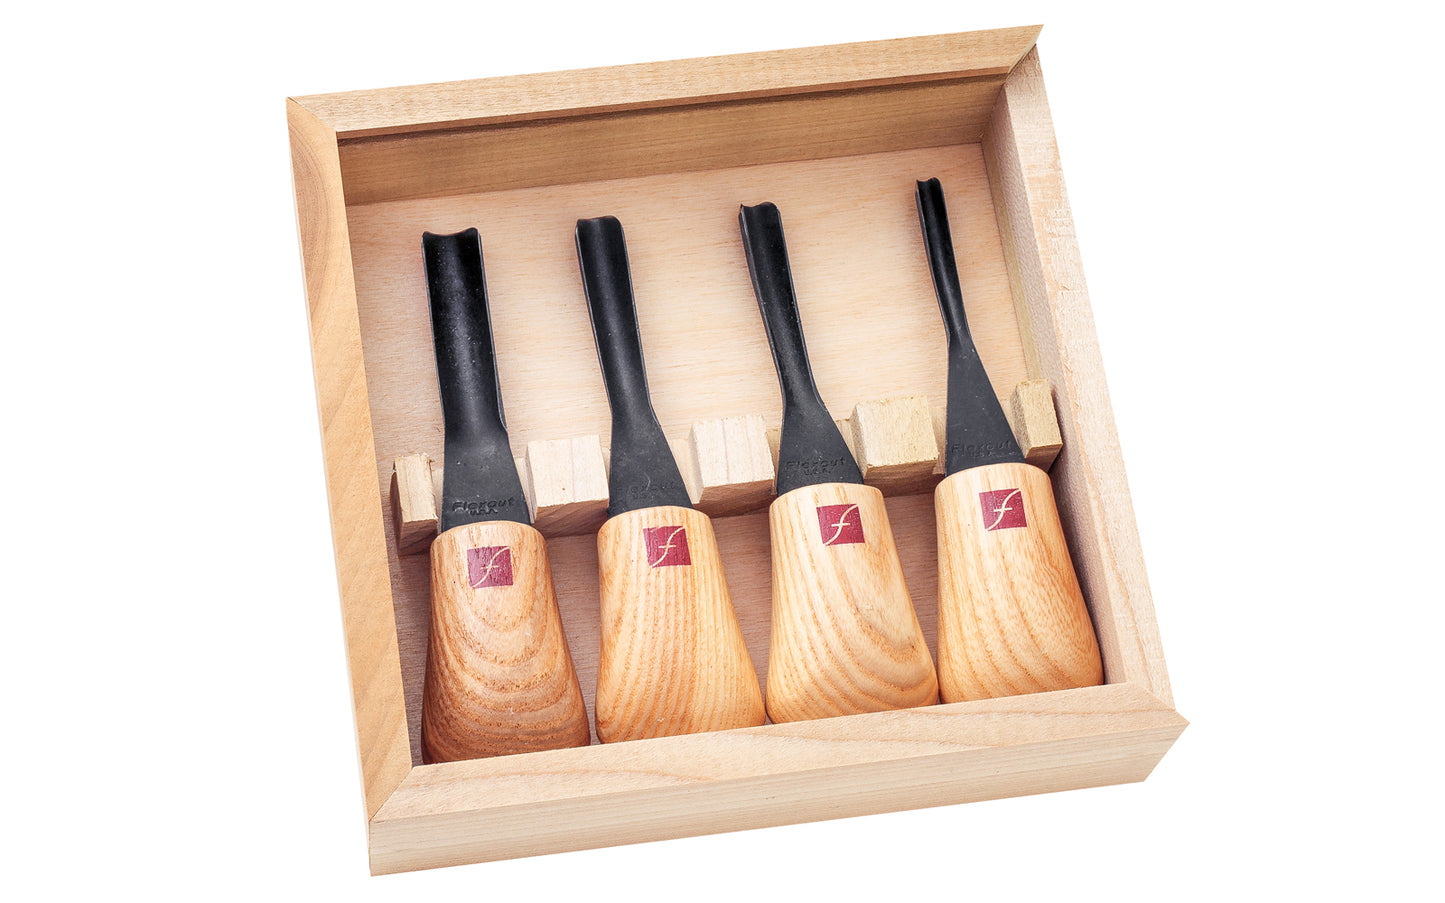 Flexcut 11X Thumbnail Carving Set ~ FR920 - 4-piece set - Includes 11X x 3/16" (5 mm), 11X x 5/16" (8 mm), 11X x 3/8" (10 mm), 11X x 1/2" (12 mm) - High Carbon Steel blades - Ash wood handles - Palm Carving Tool Set - Made in USA - These very deep gouges are designed with a parabolic curve ~ 651646009201